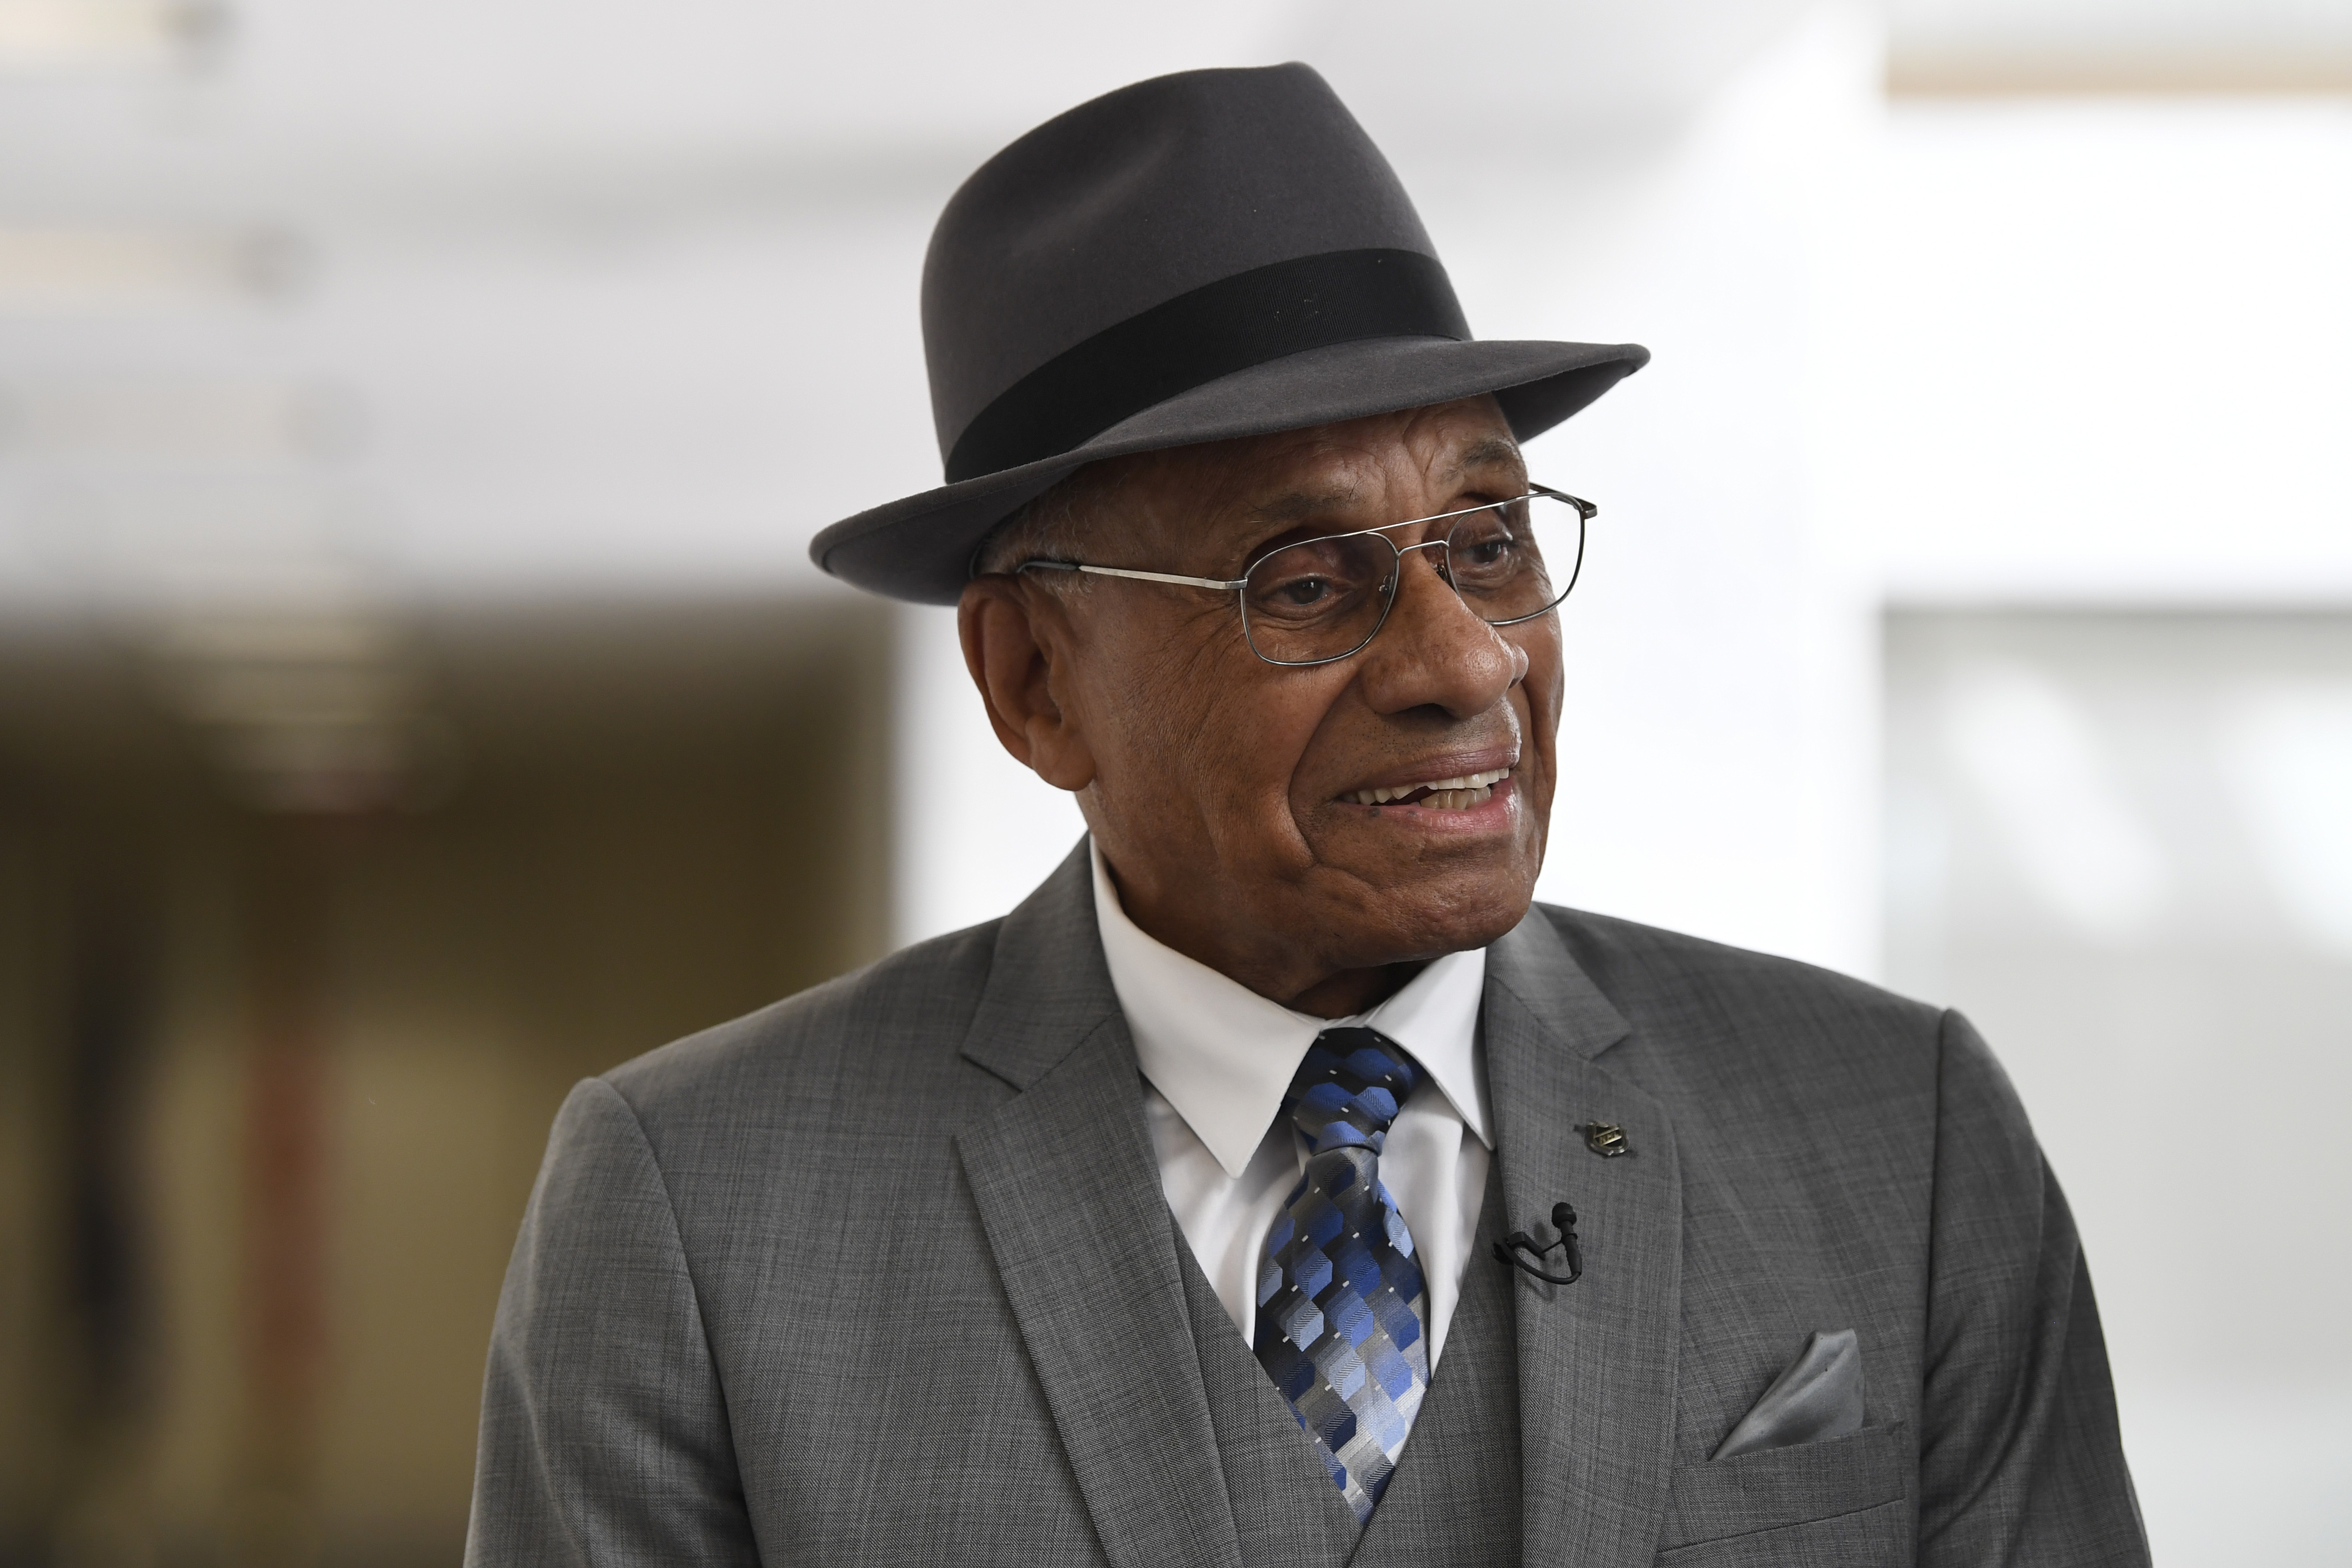 The remarkable secret of Willie O'Ree